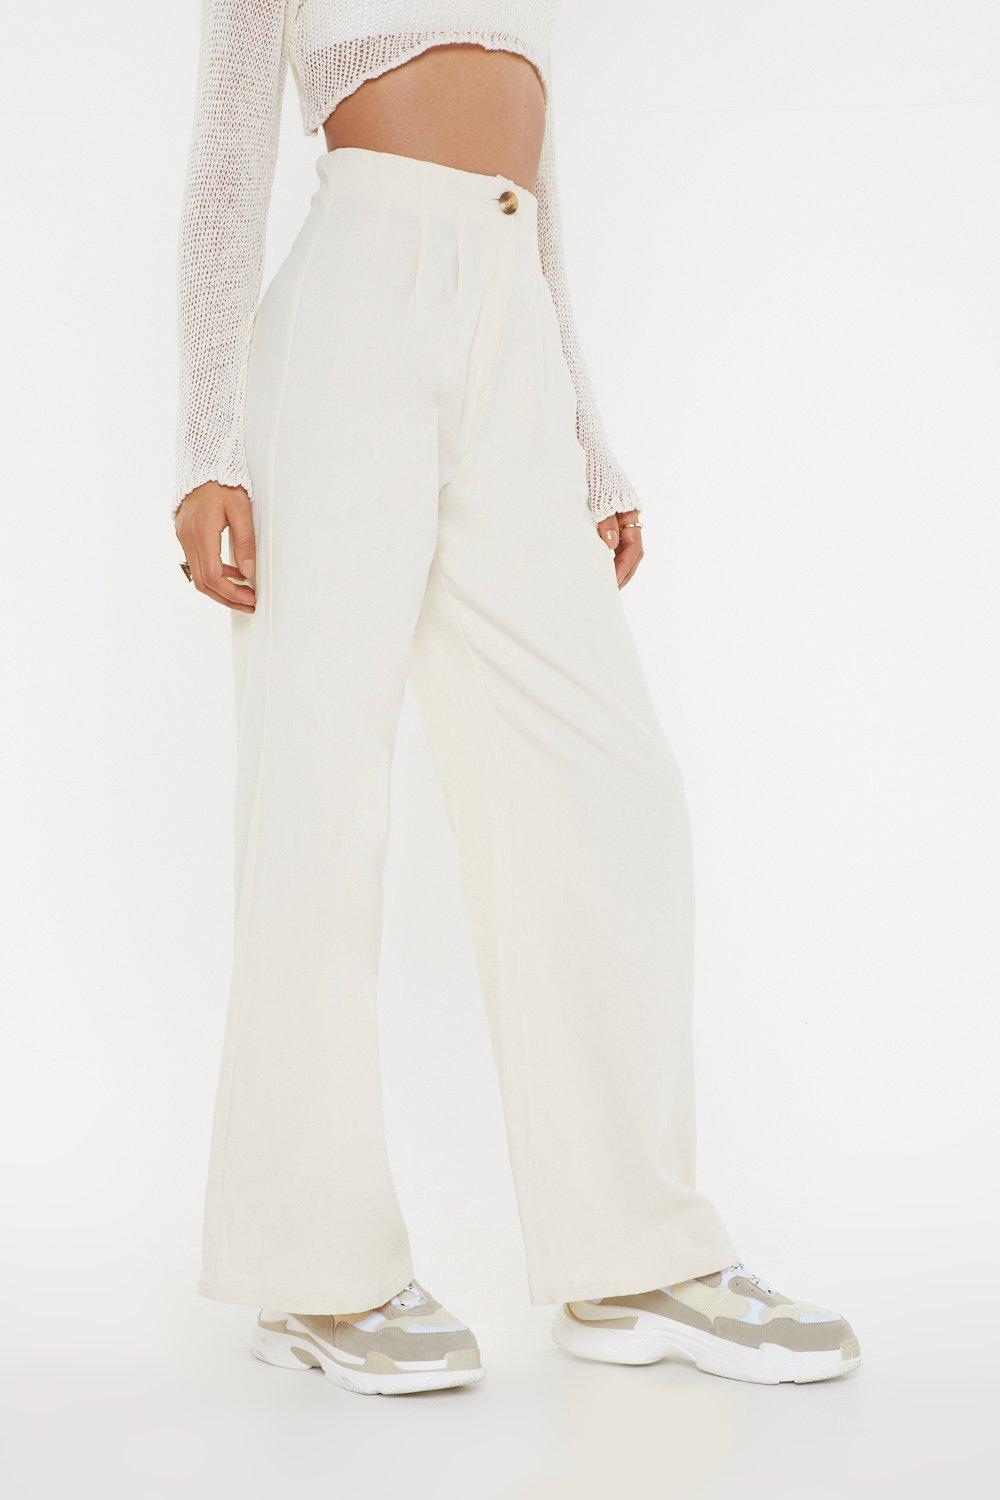 High Waisted Linen Pants With Wide Legs 